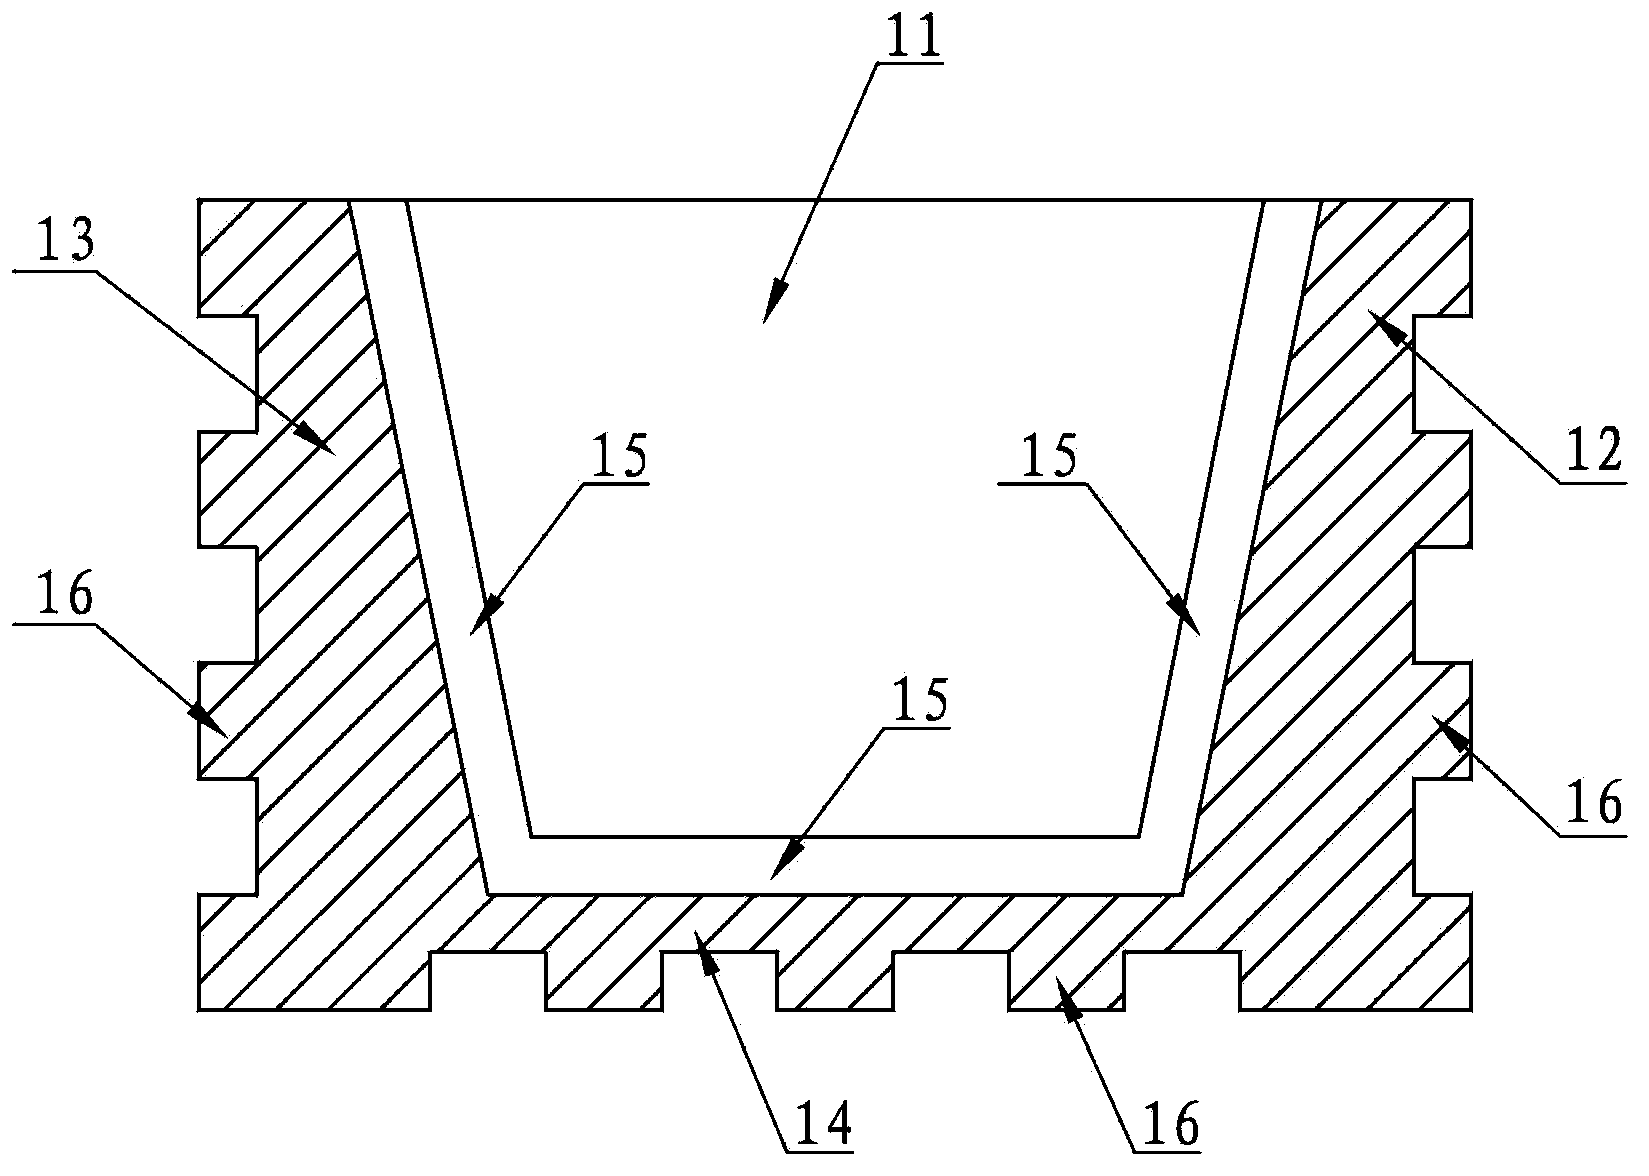 Prefabricated irrigation water intake and drainage control device for a paddy field